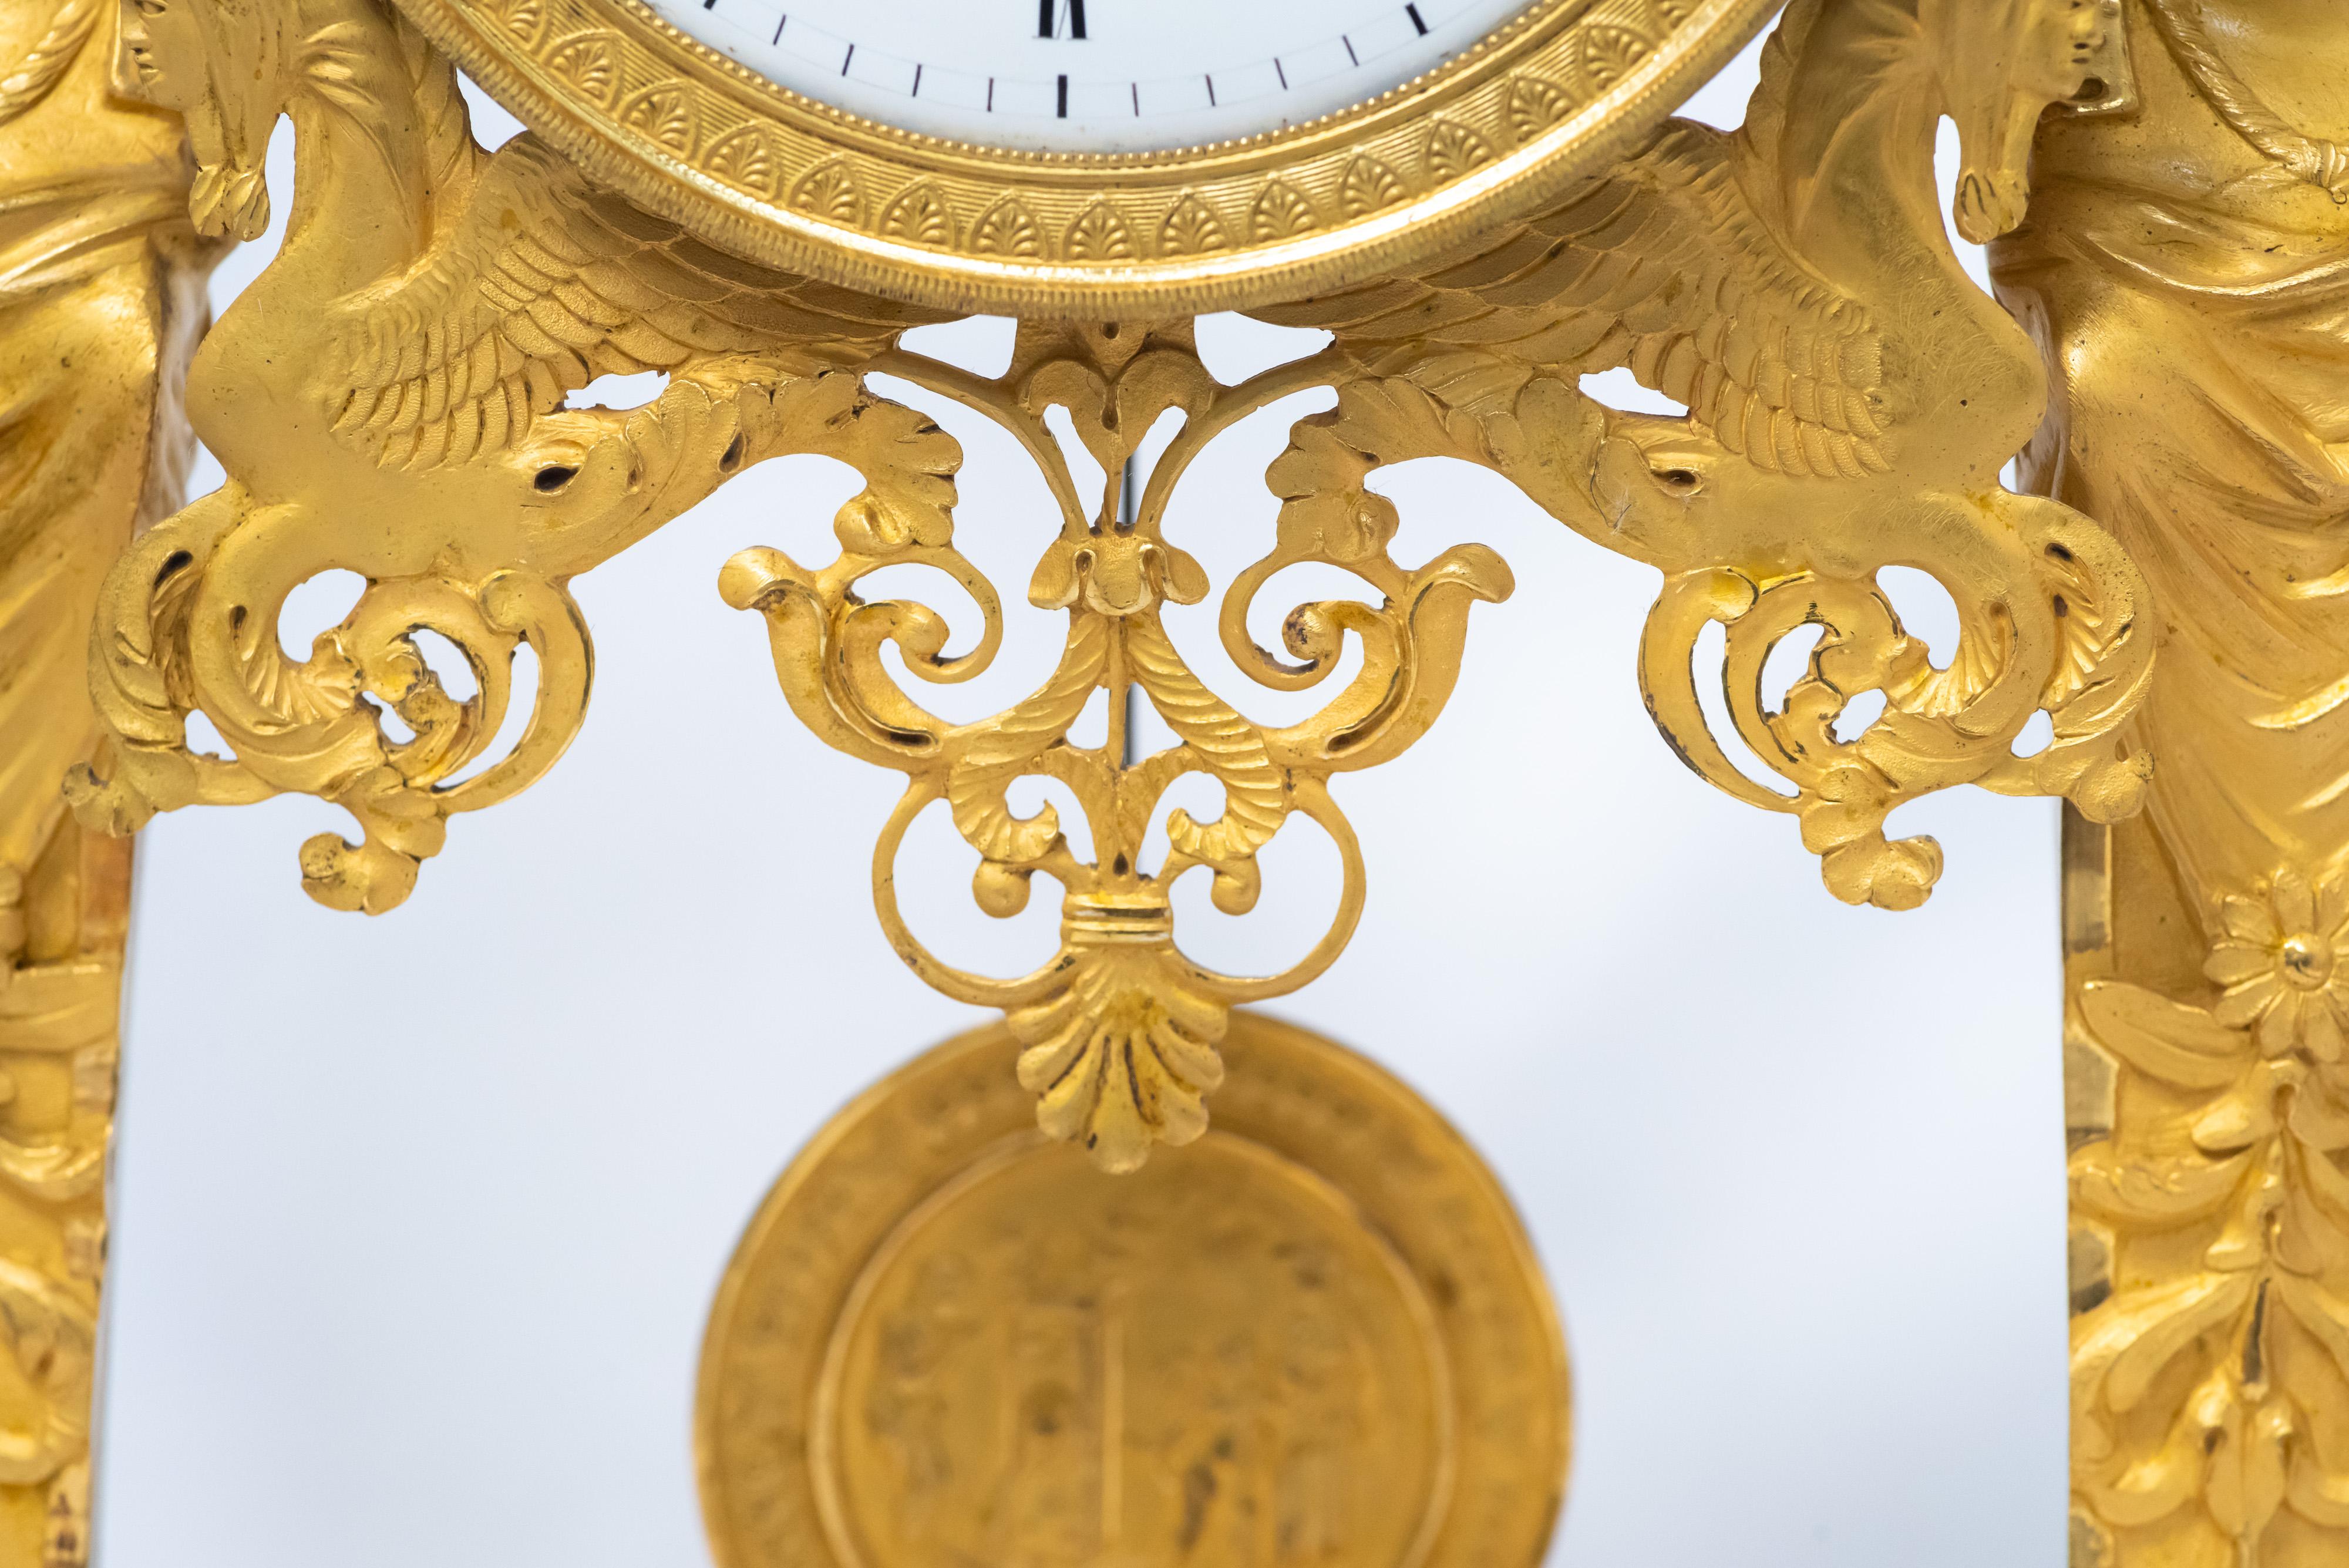 French Marble and Fire-Gilt-Bronze Directoire-Era Portico Clock Retour d'Egypte Style For Sale